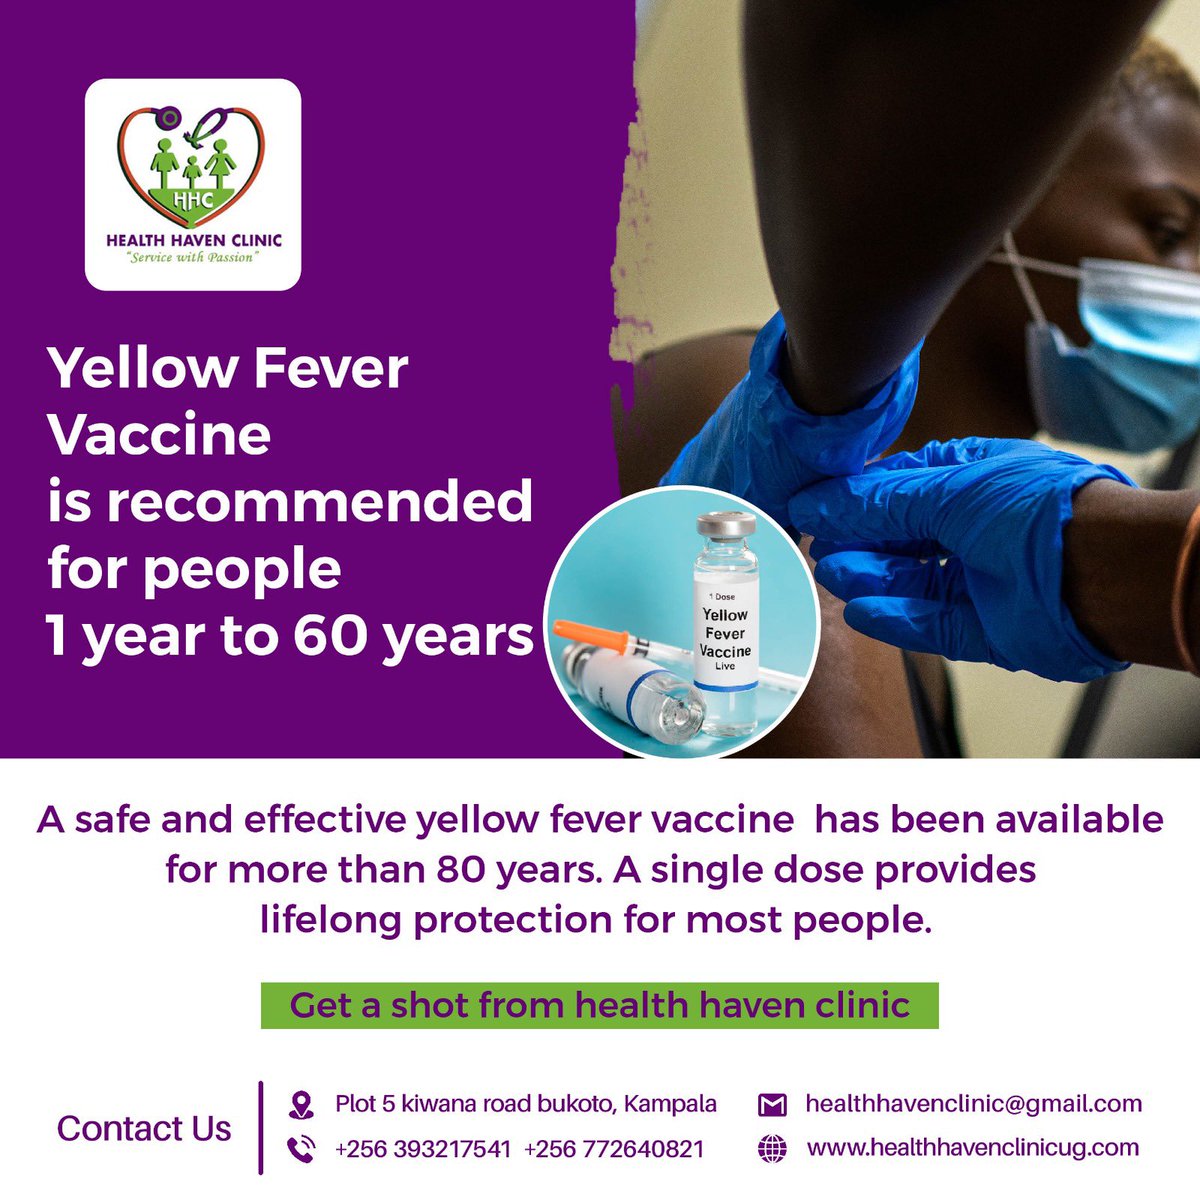 Protect yourself and your loved ones from yellow fever – get vaccinated today! Vaccination is your best defense against this serious disease. Don't wait until it's too late, visit Health Haven Clinic and get vaccinated. #HealthHavenClinicUg